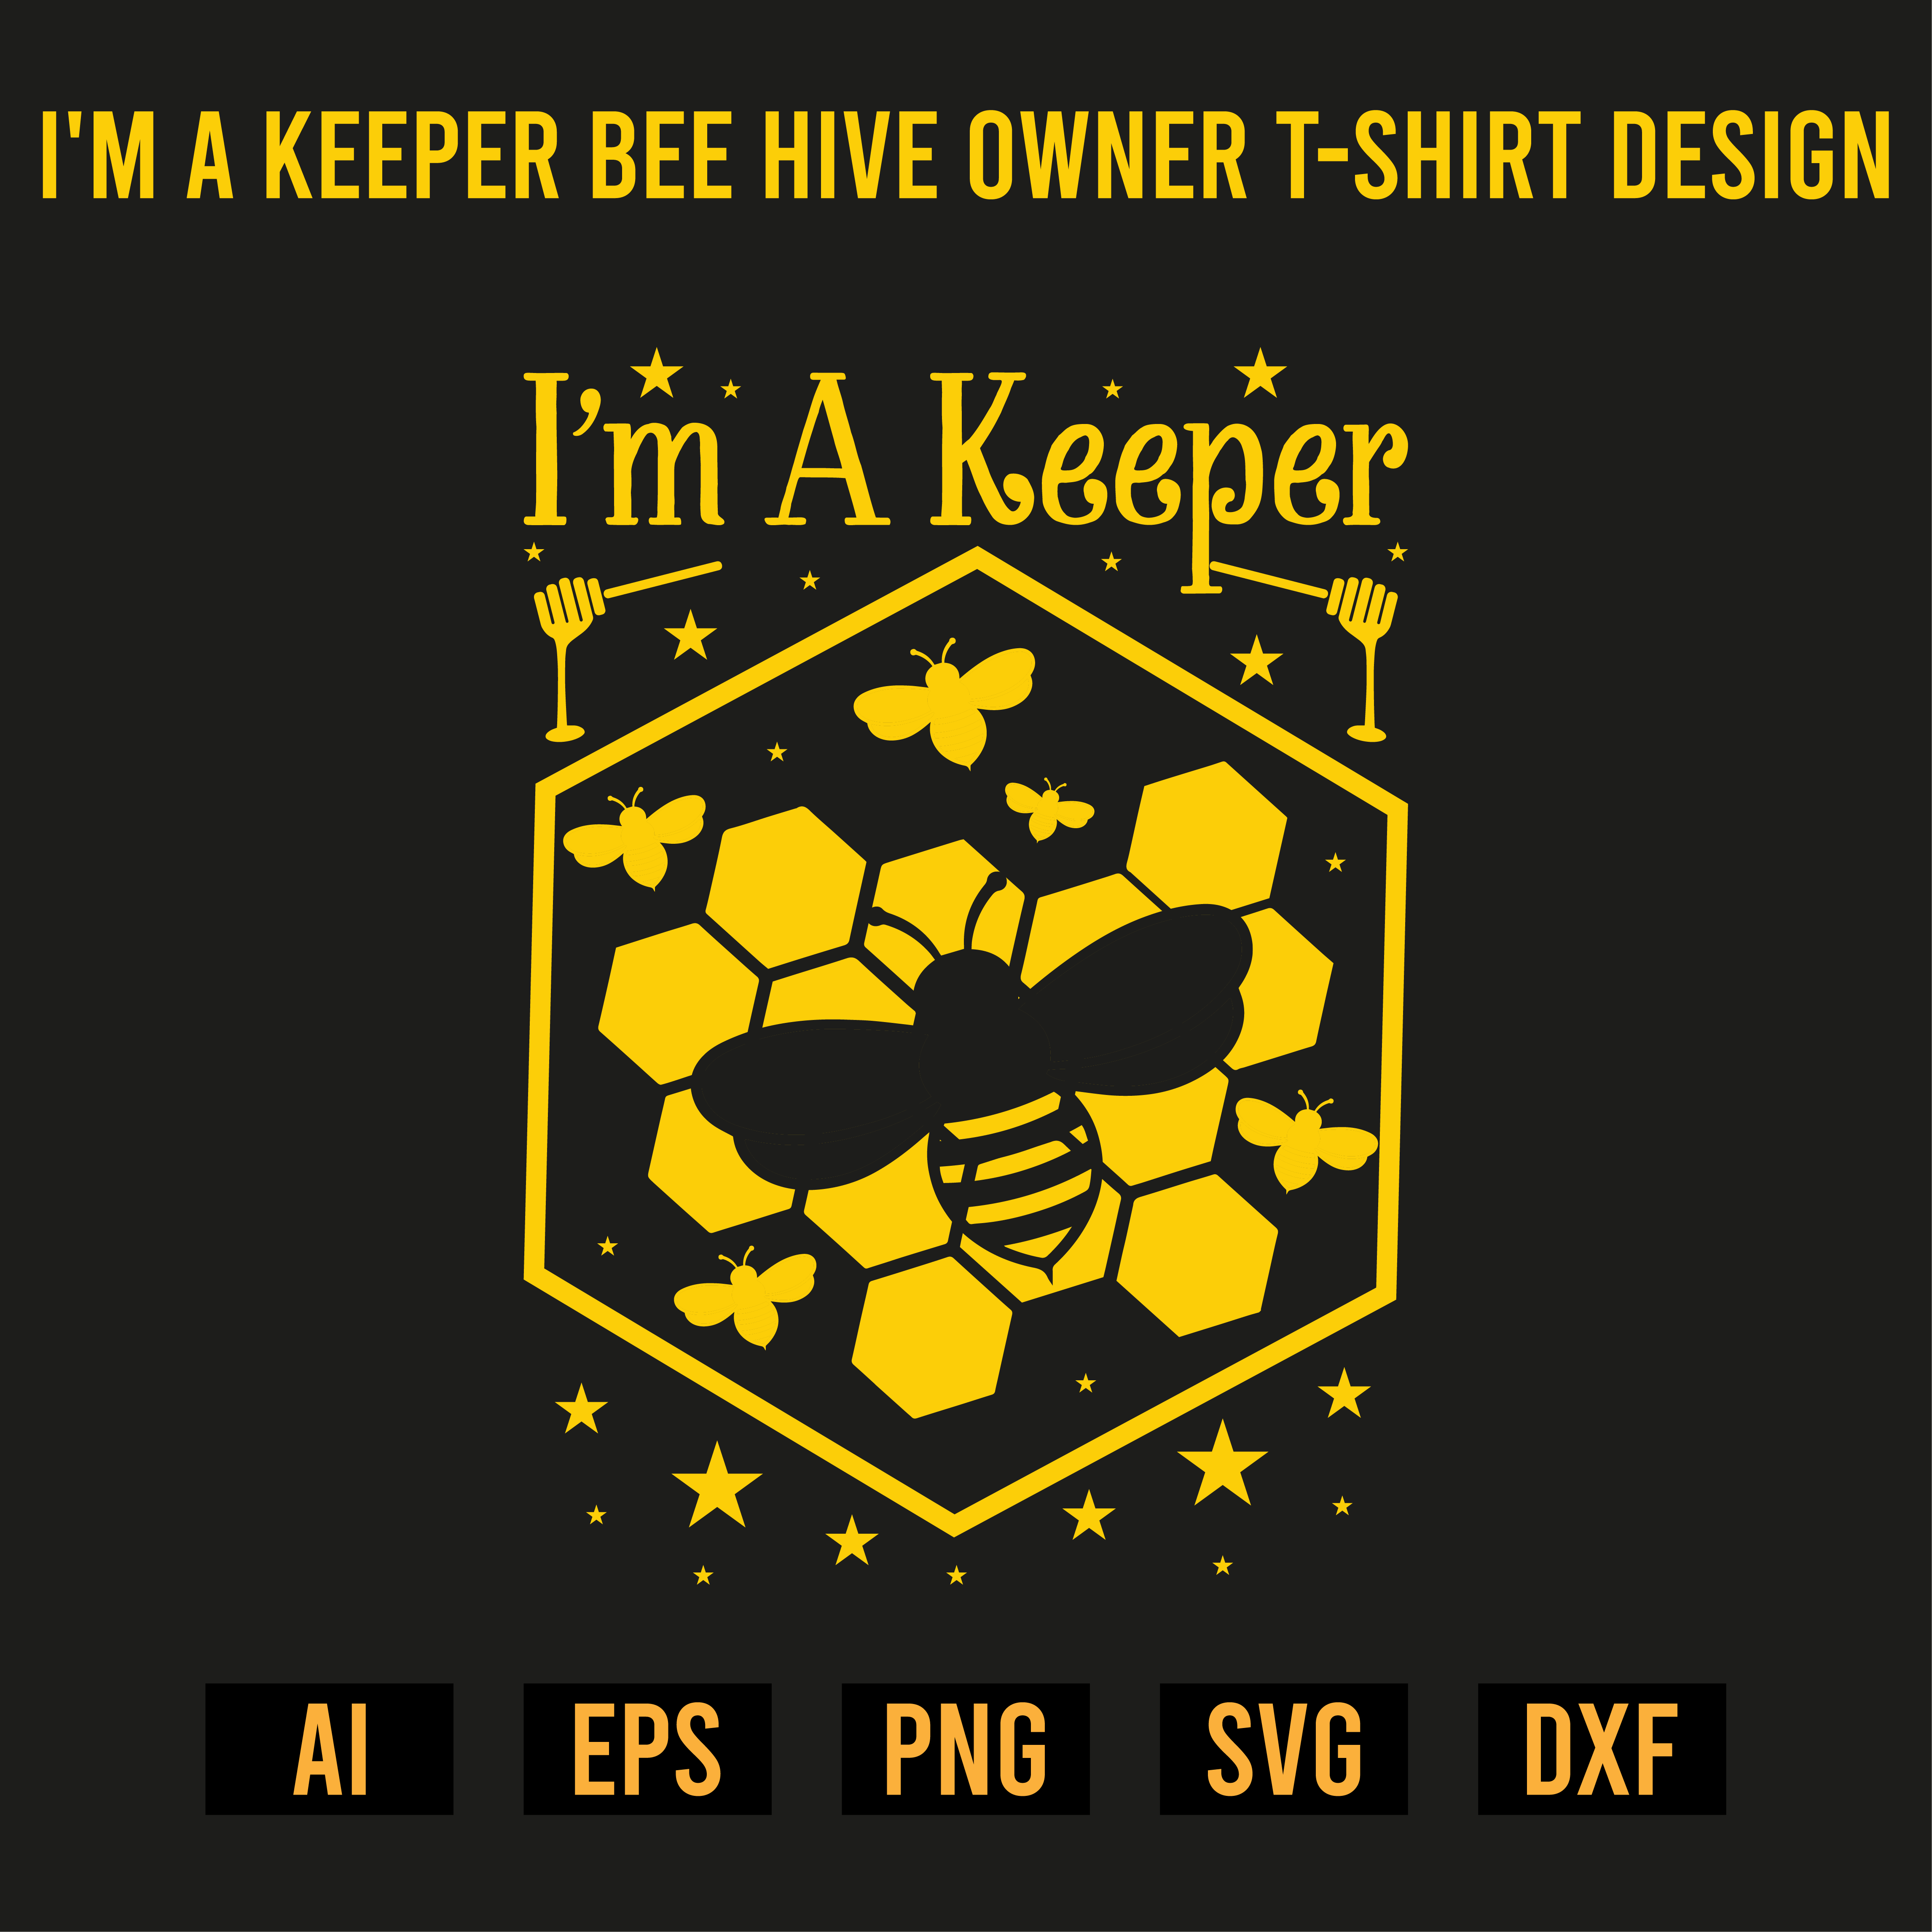 I'm A Keeper Bee Hive Owner T- Shirt Design cover image.